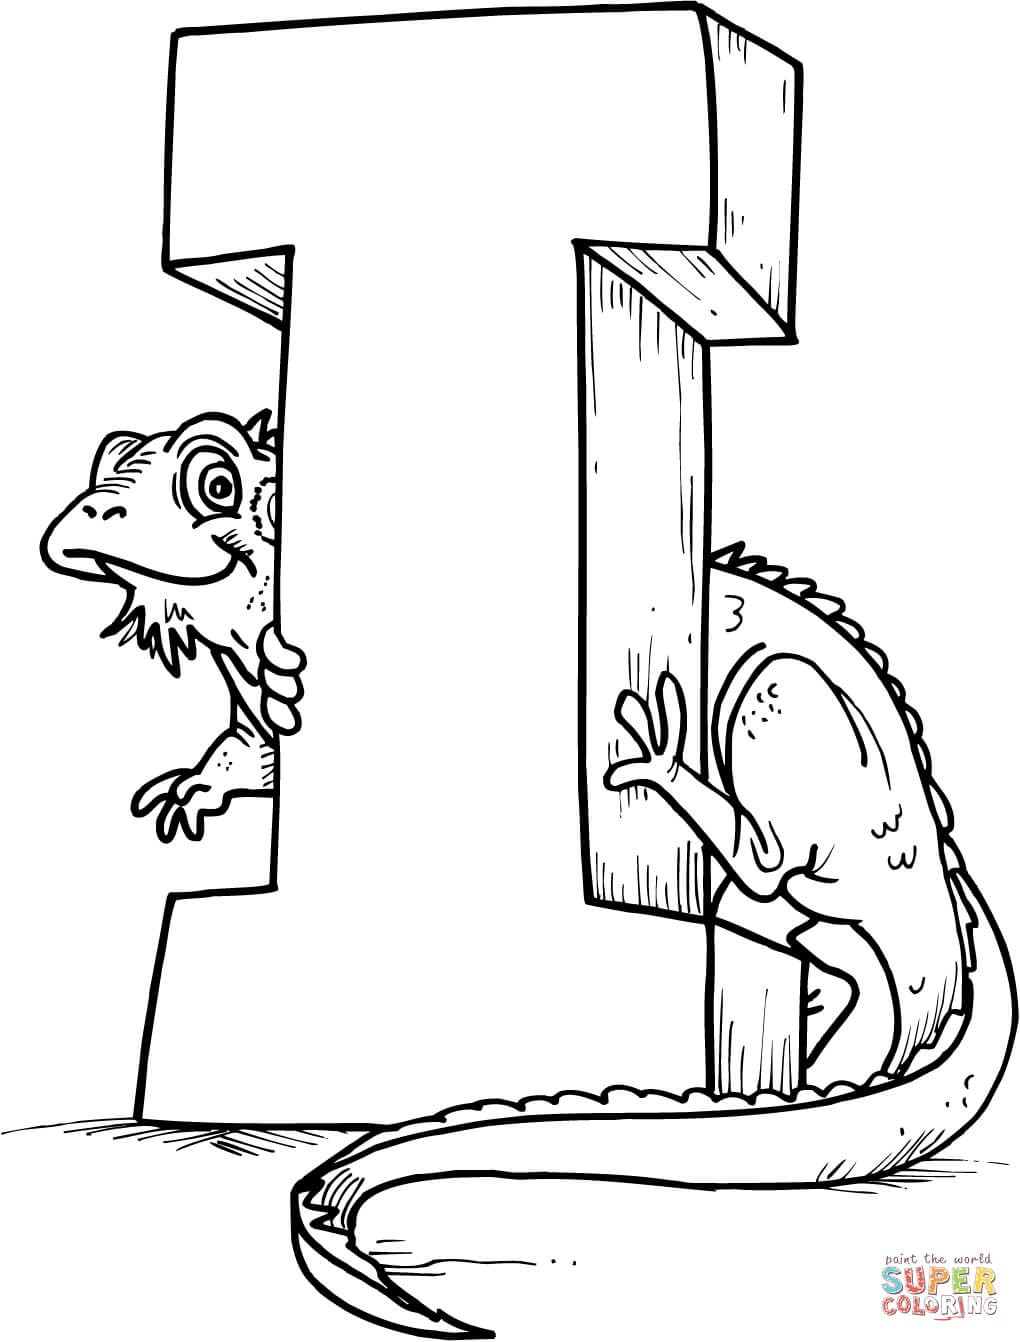 Iguana Coloring Page Iguana Coloring Pages Lrcp Coloring Page